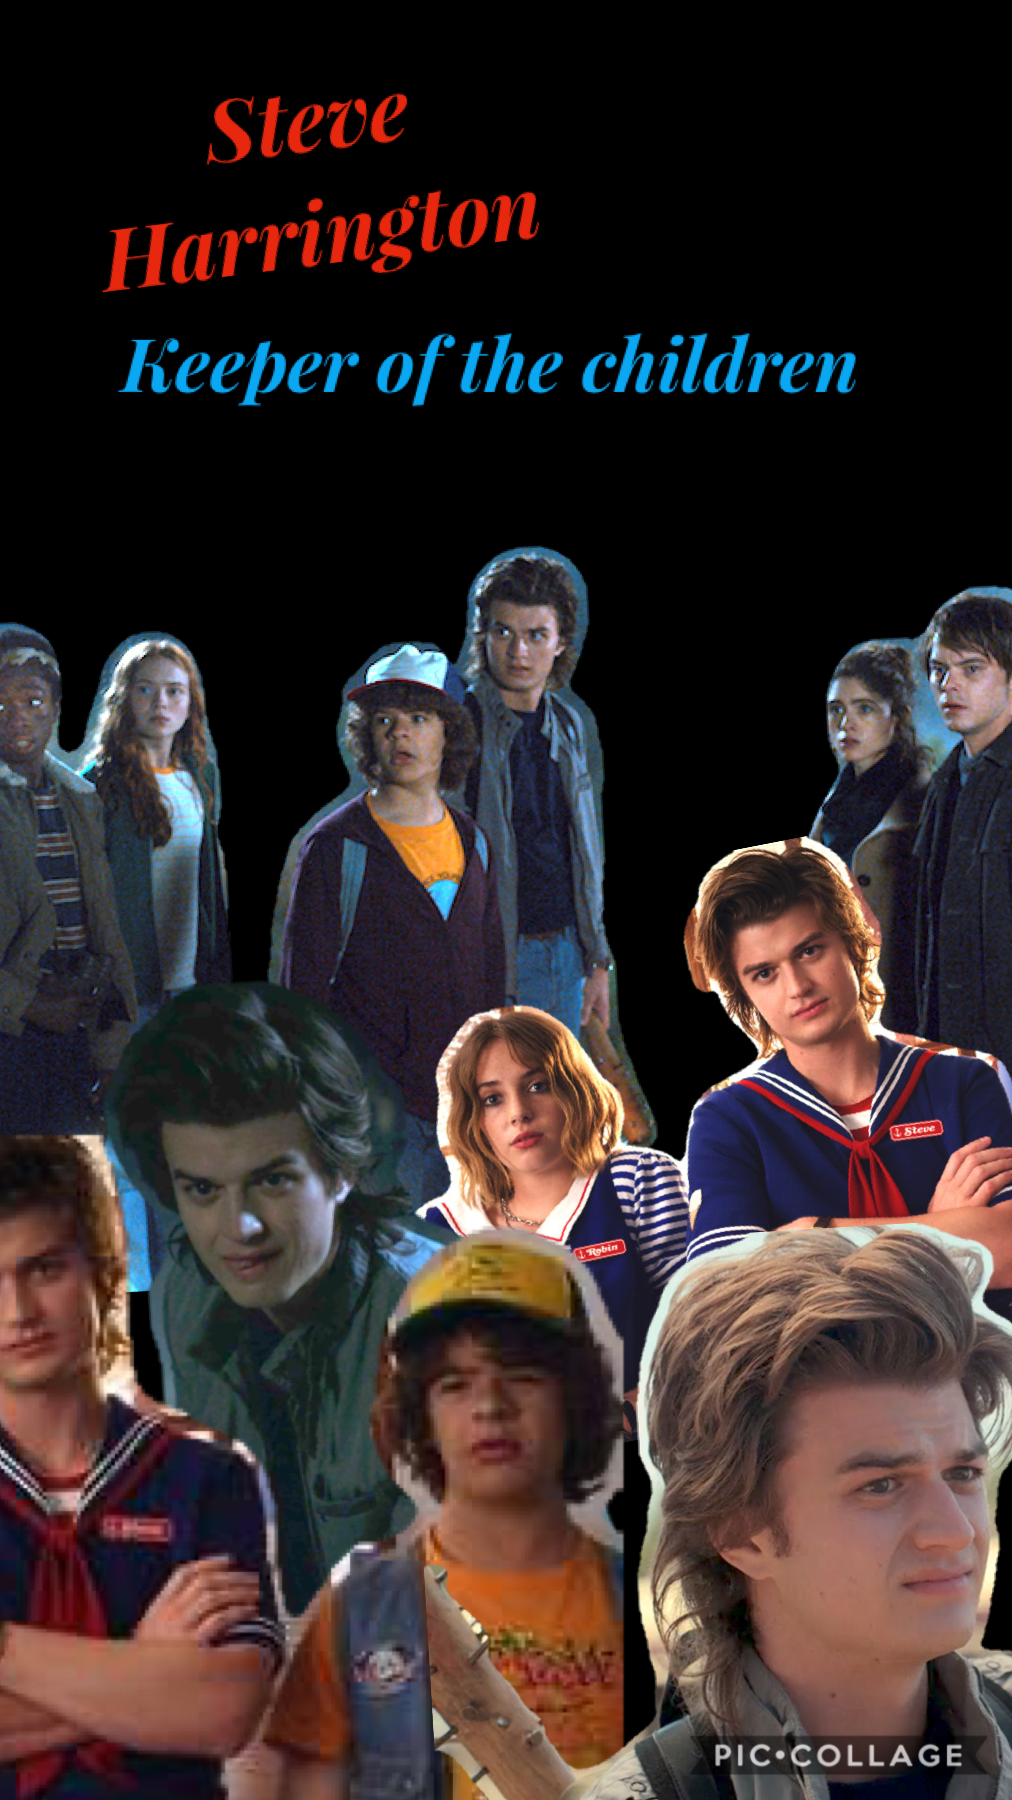 Stranger things characters and titles
Steve Harrington-Keeper of the children